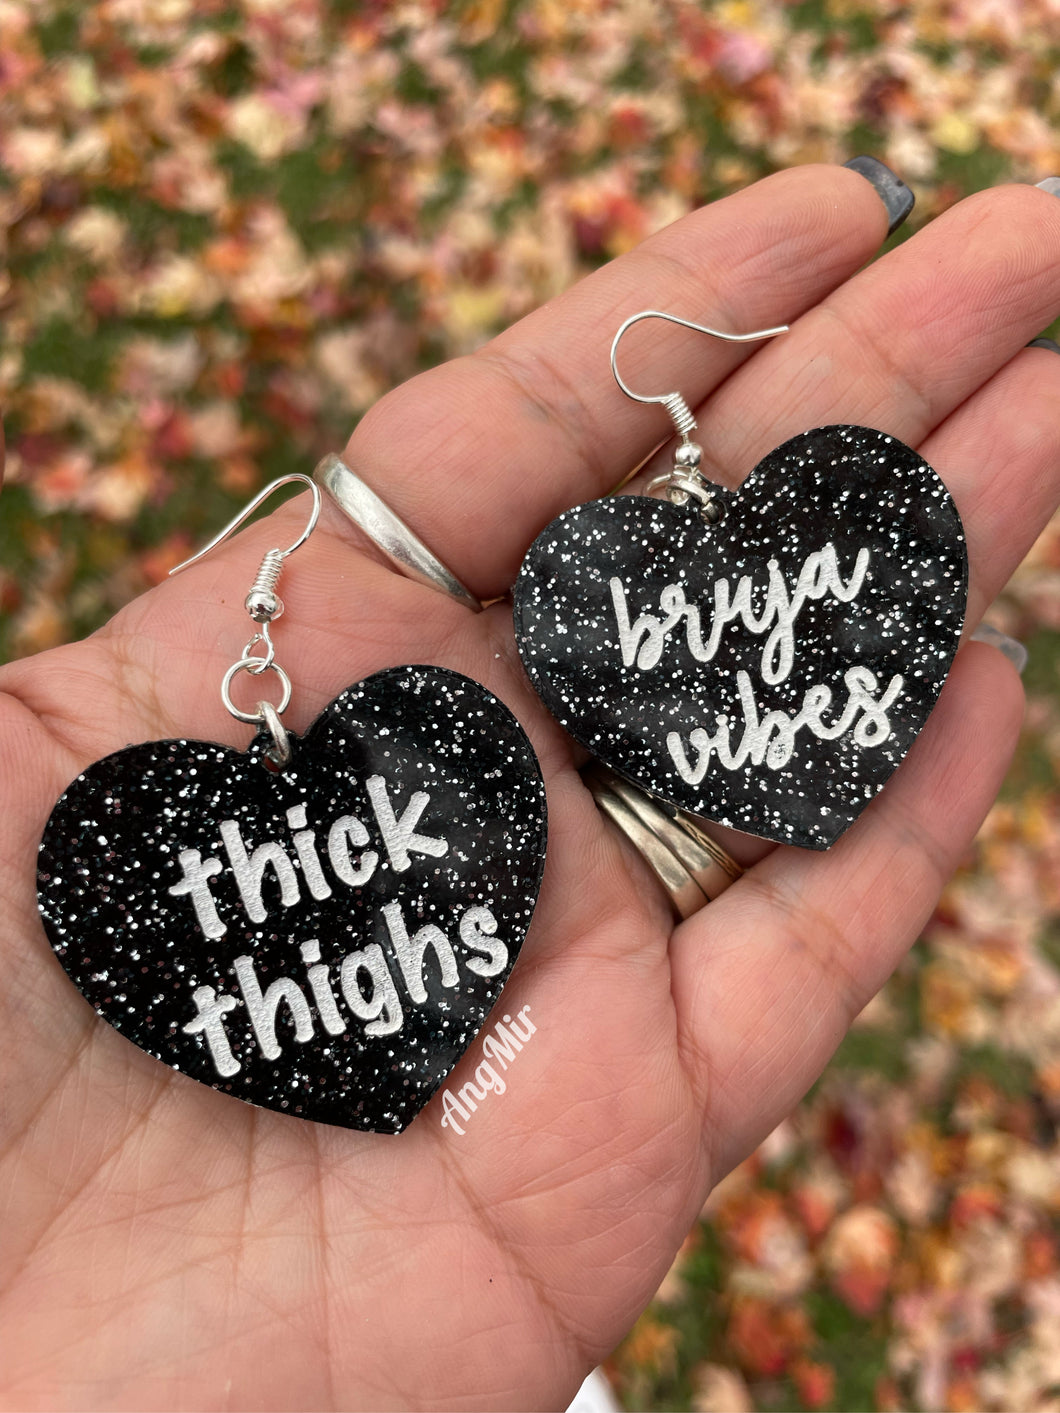 Thick thighs Bruja Vibes earrings